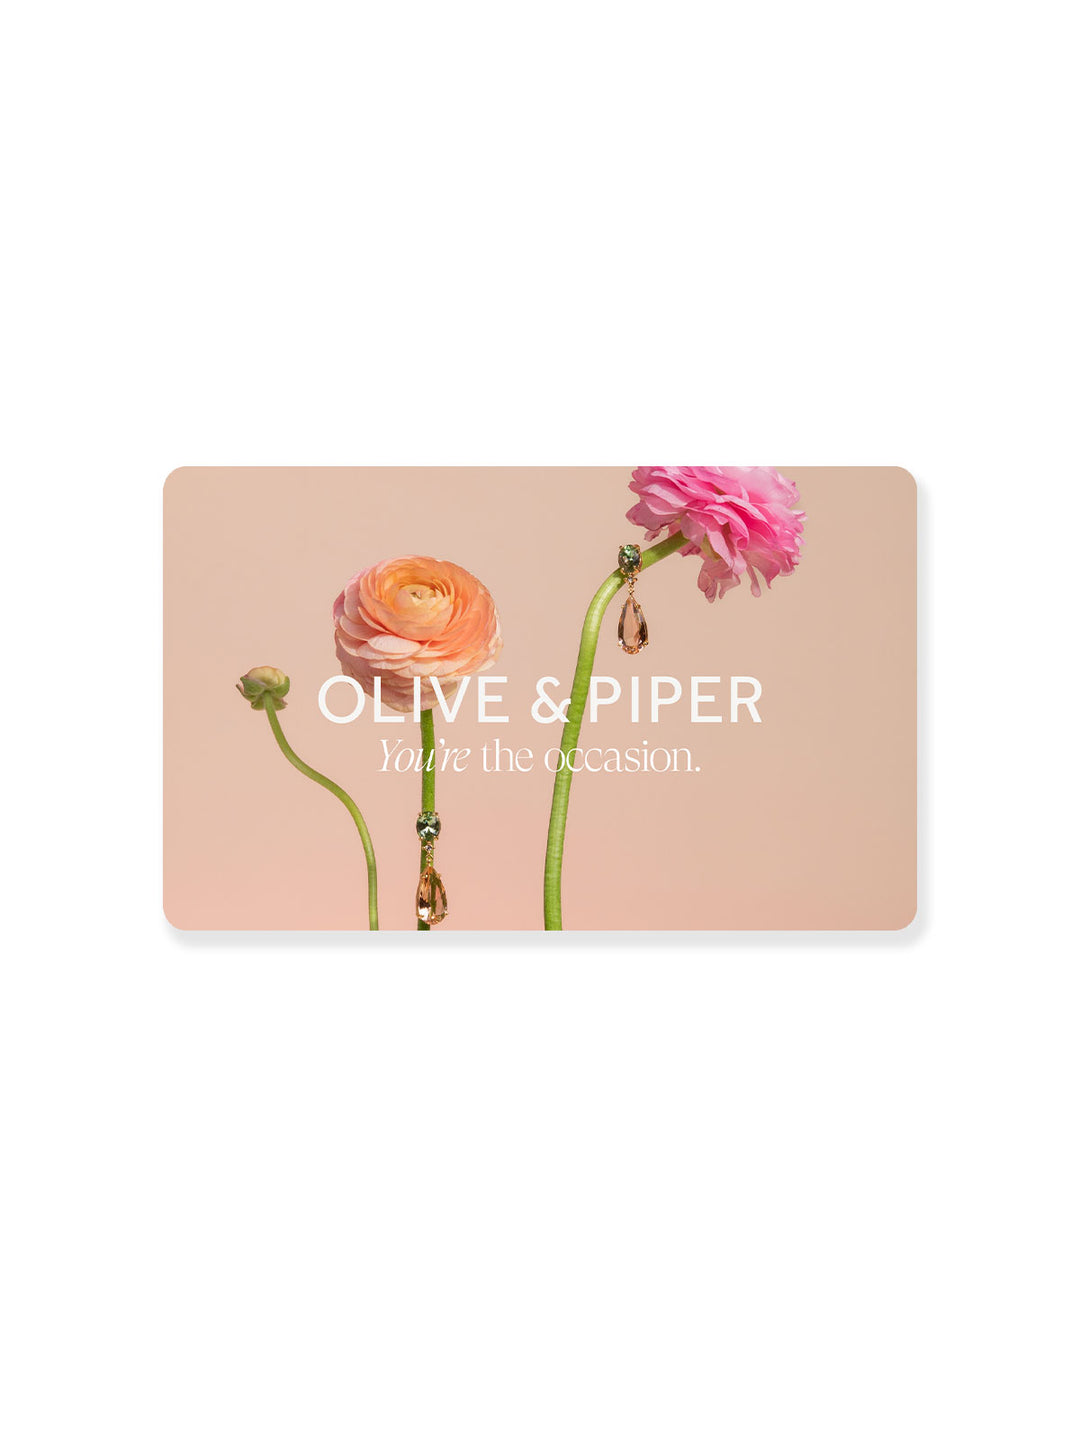 Olive & Piper Gift Card 